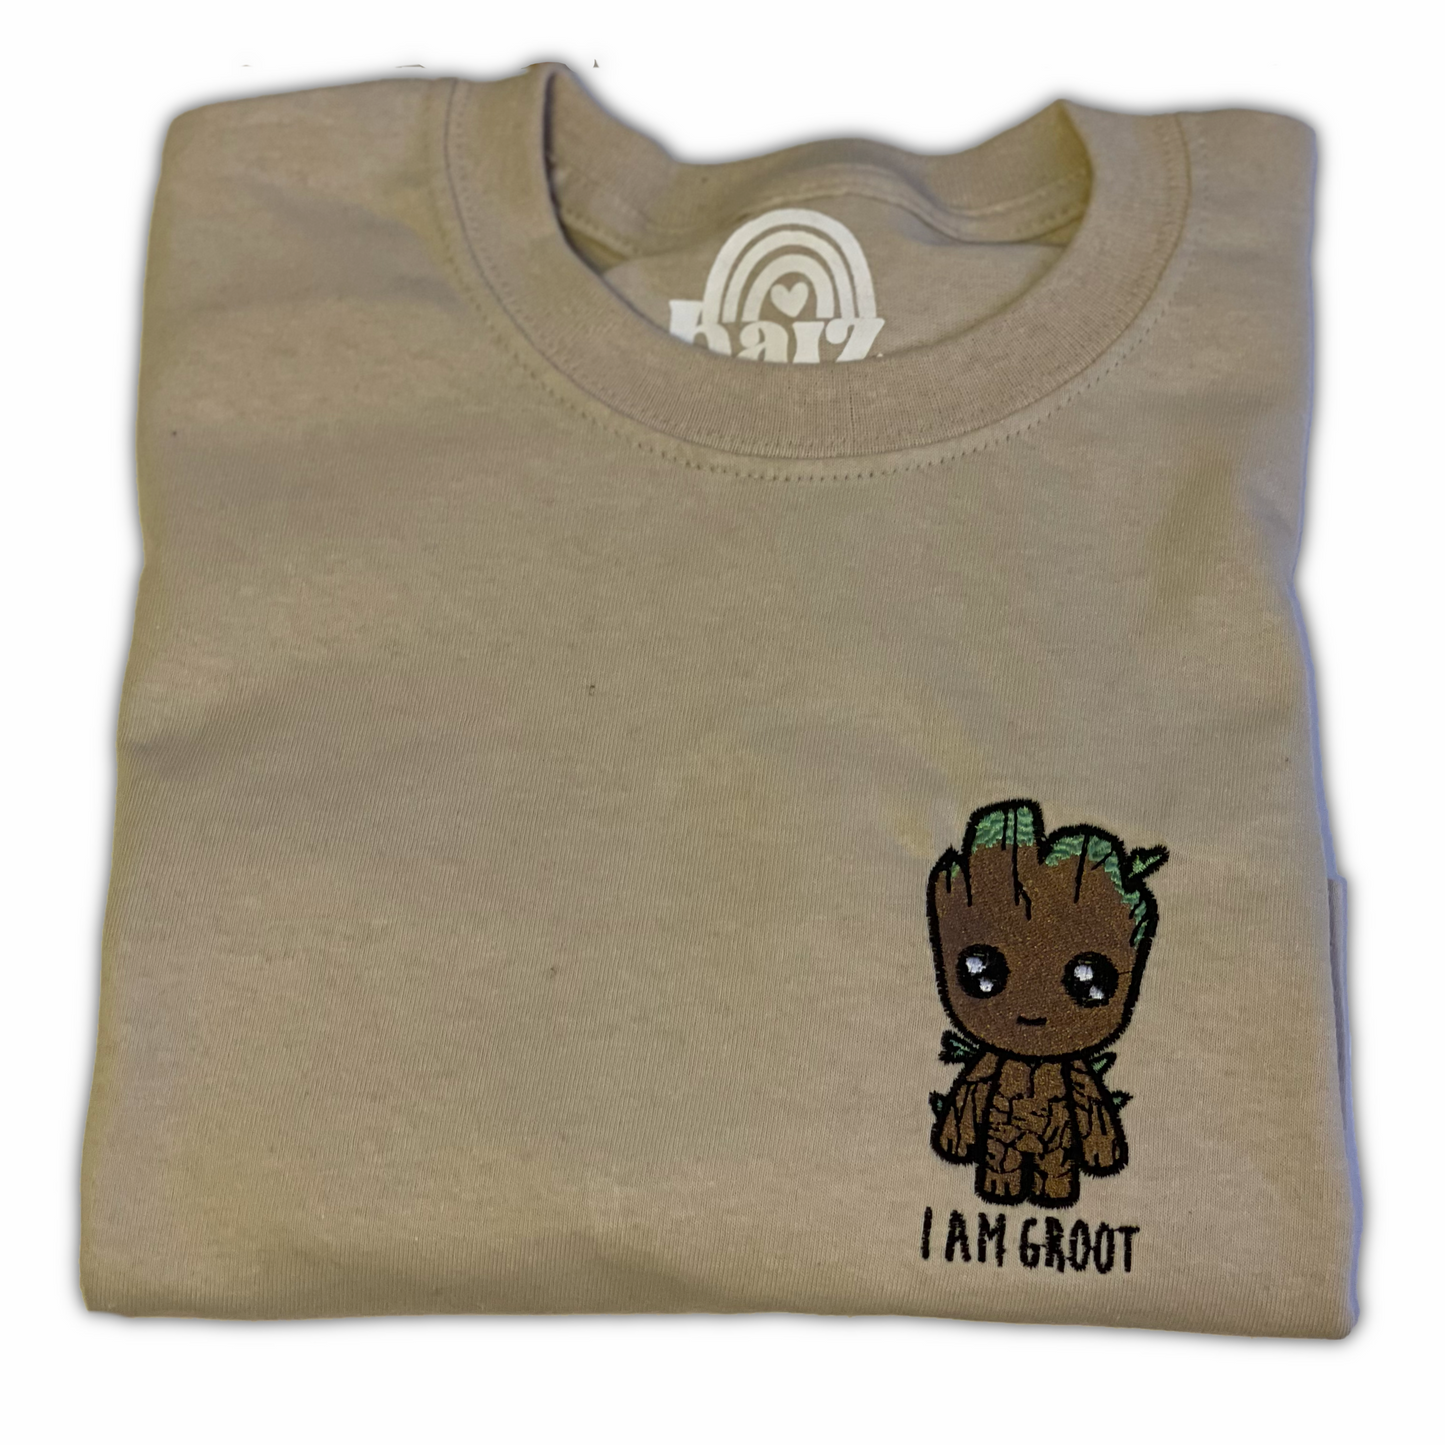 I am Groot embroidered t-shirt